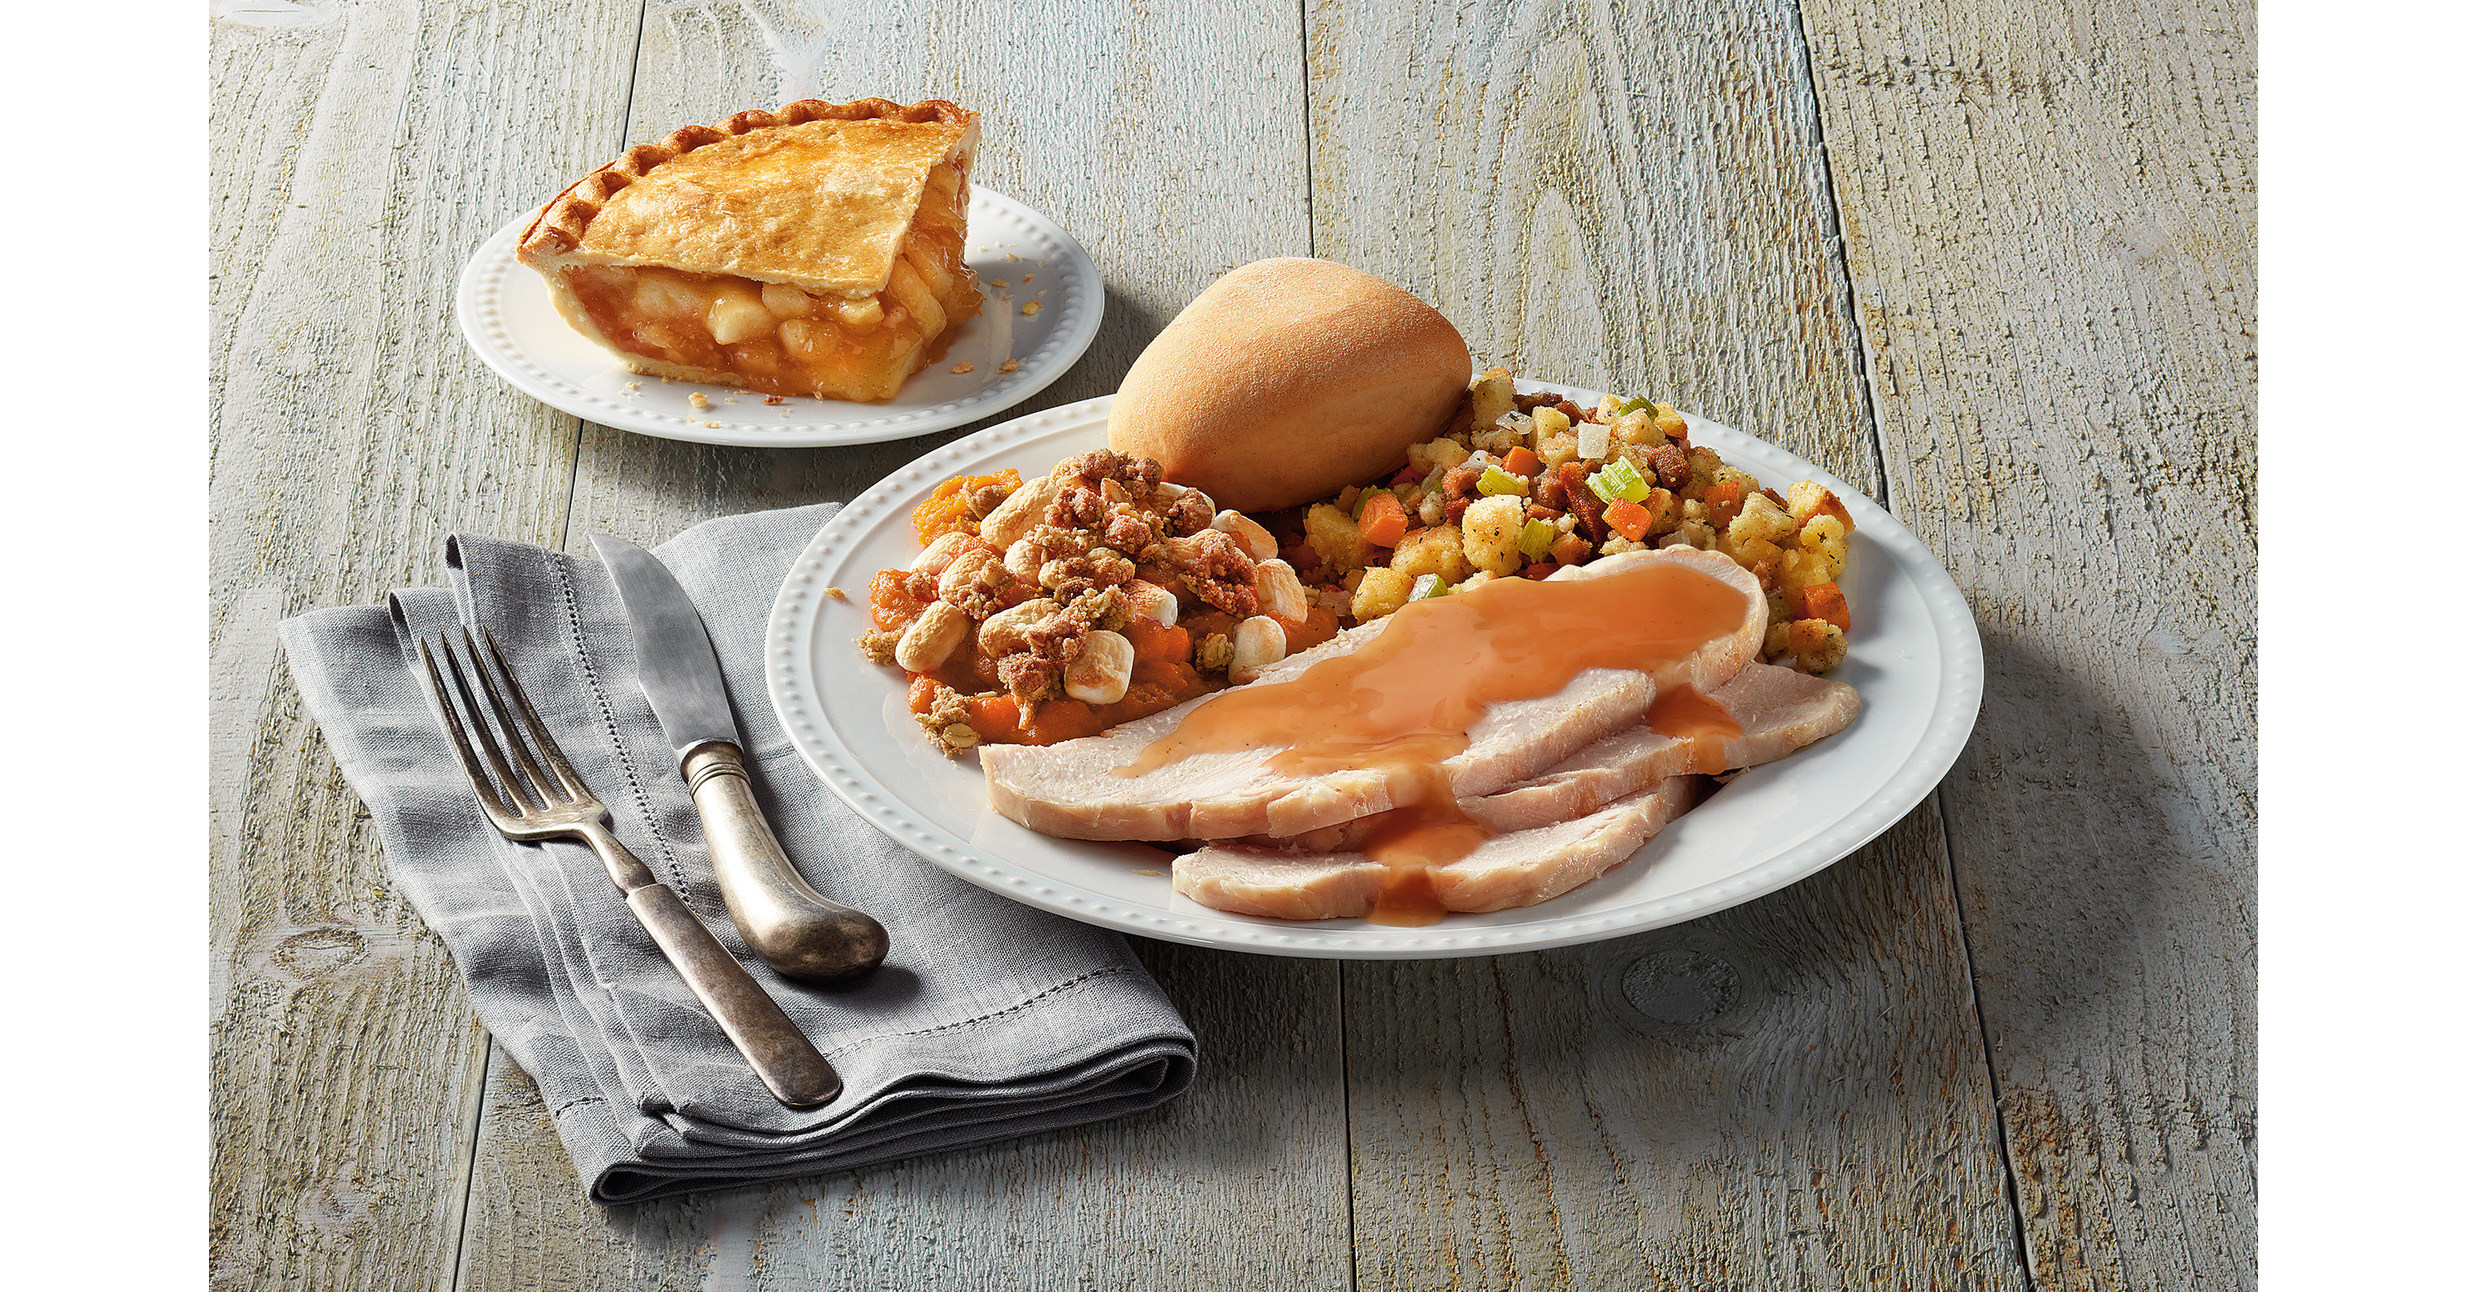 Boston Market Brings Loved Ones Together With Delicious Meal Options